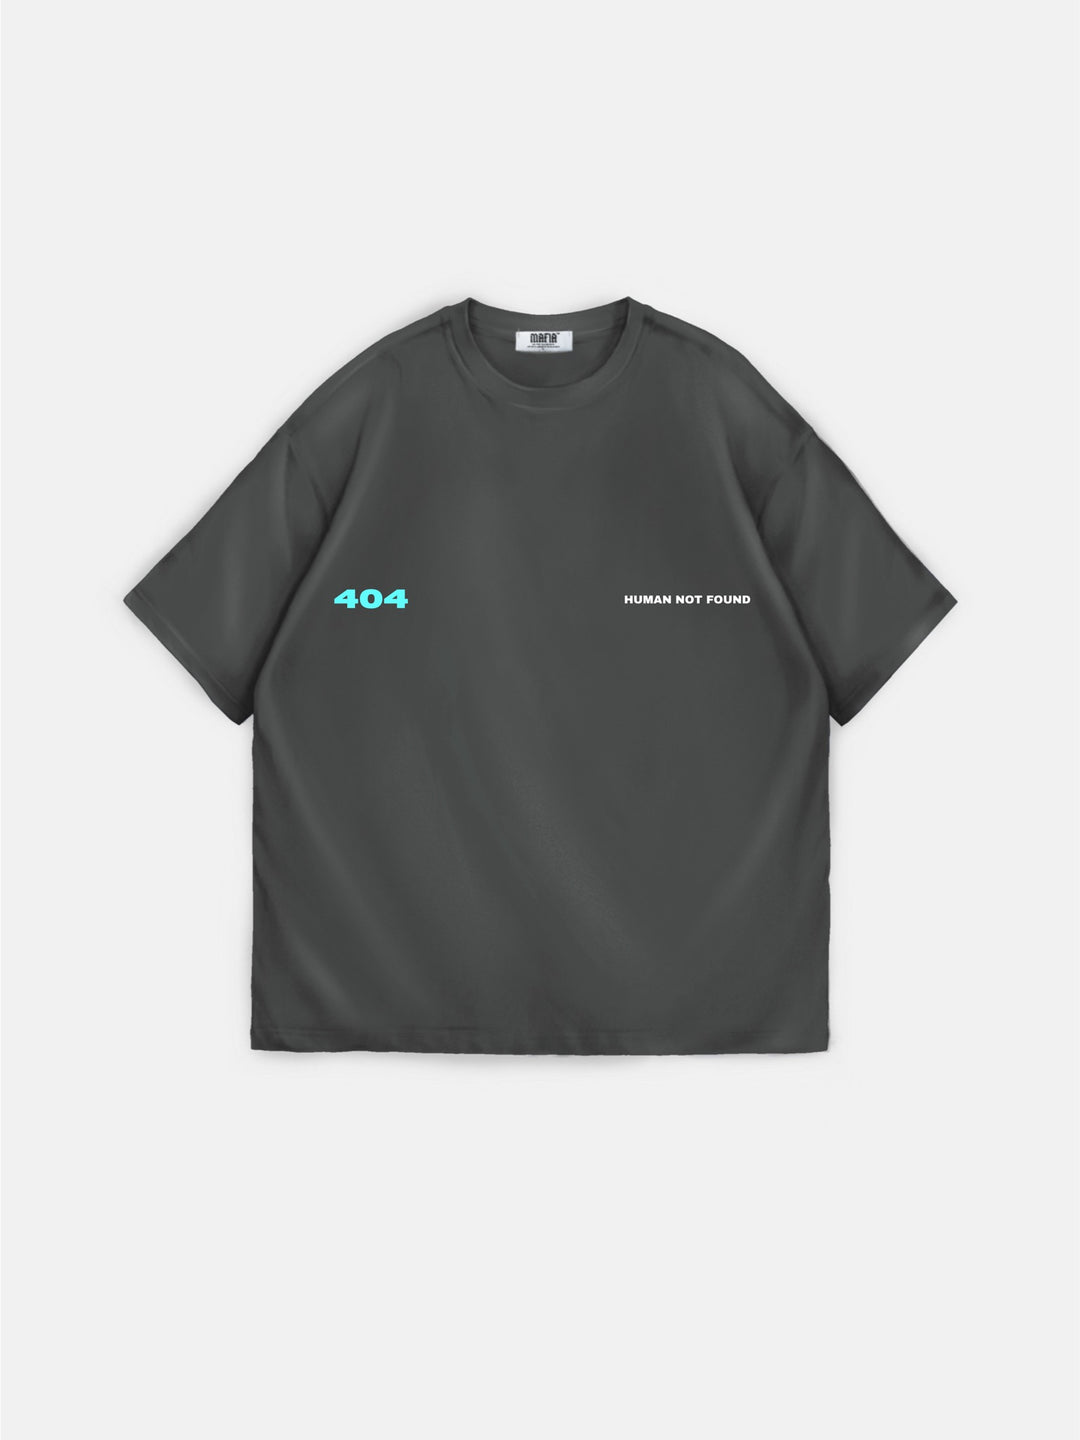 Oversize 404 T-shirt - Anthracite